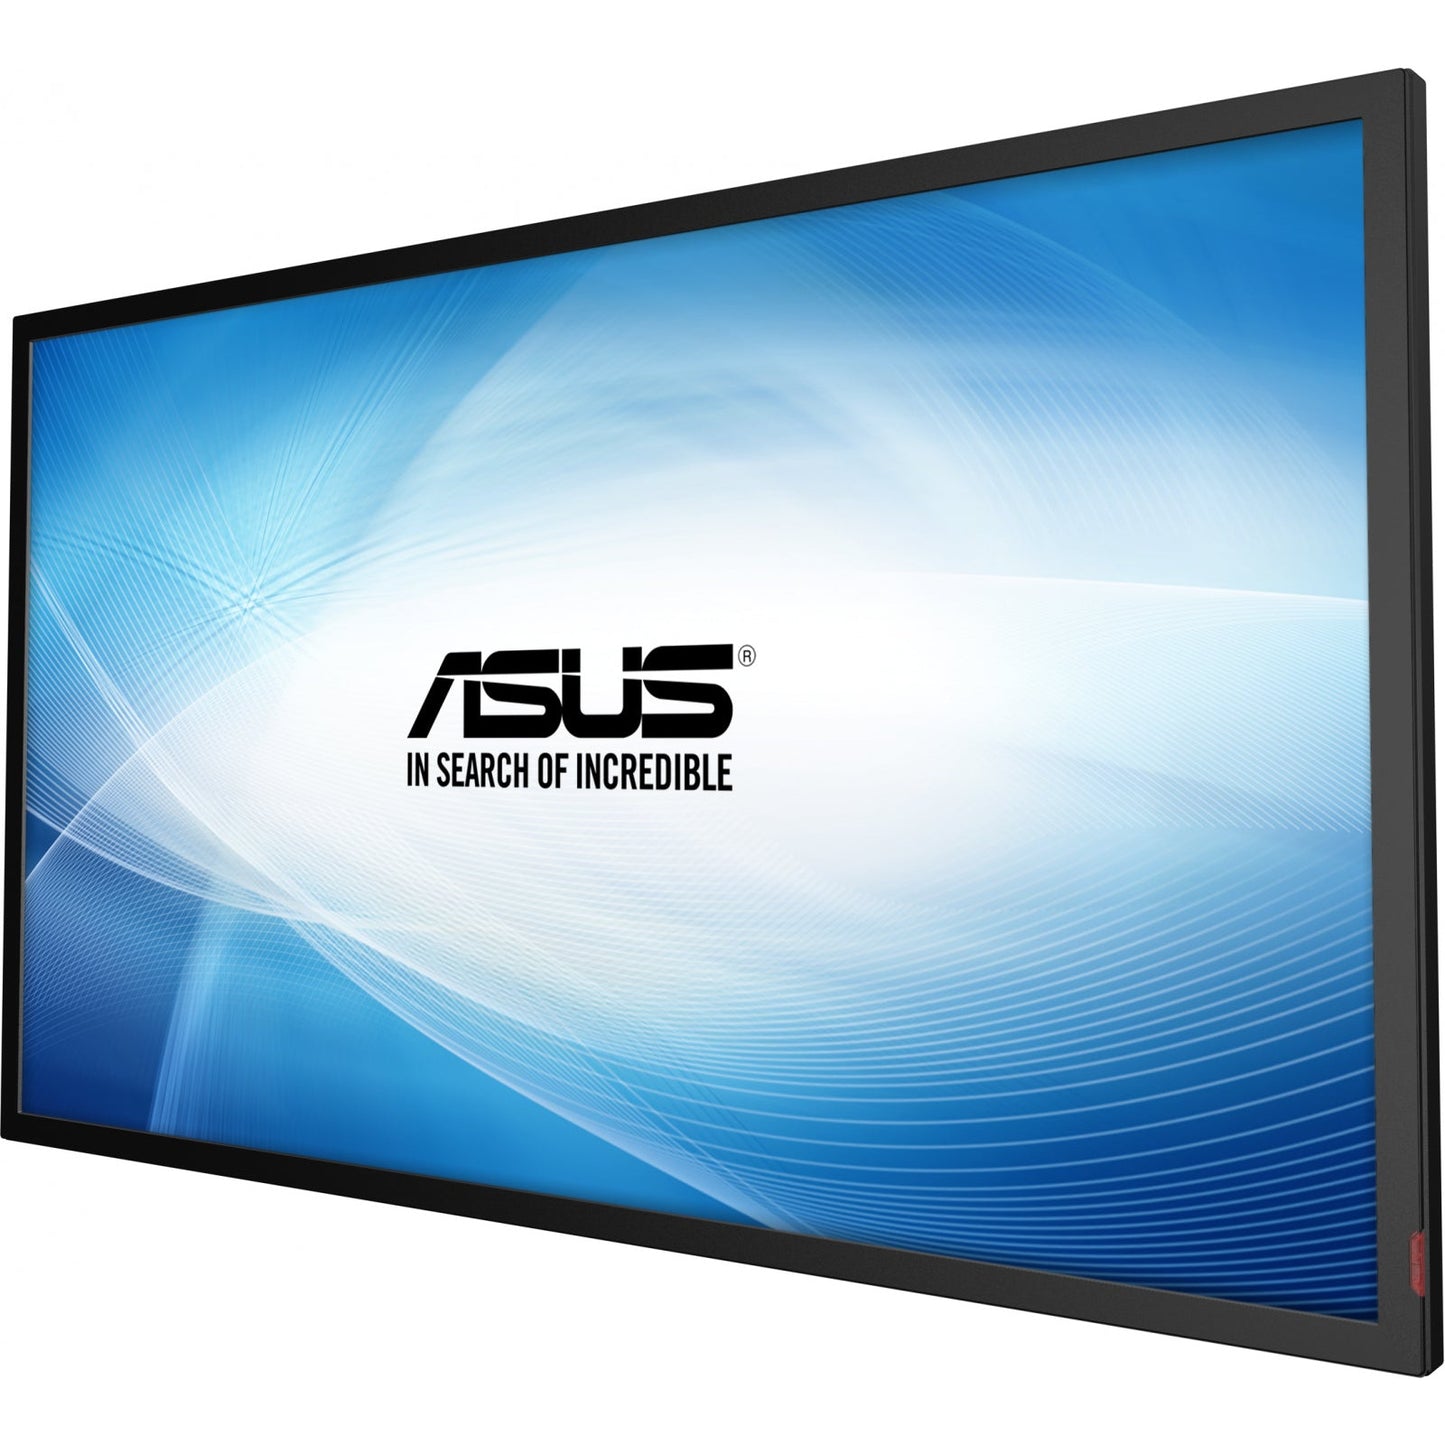 Asus 42 SD424 Digital Signage Monitor FHD IPS w/ Media Player